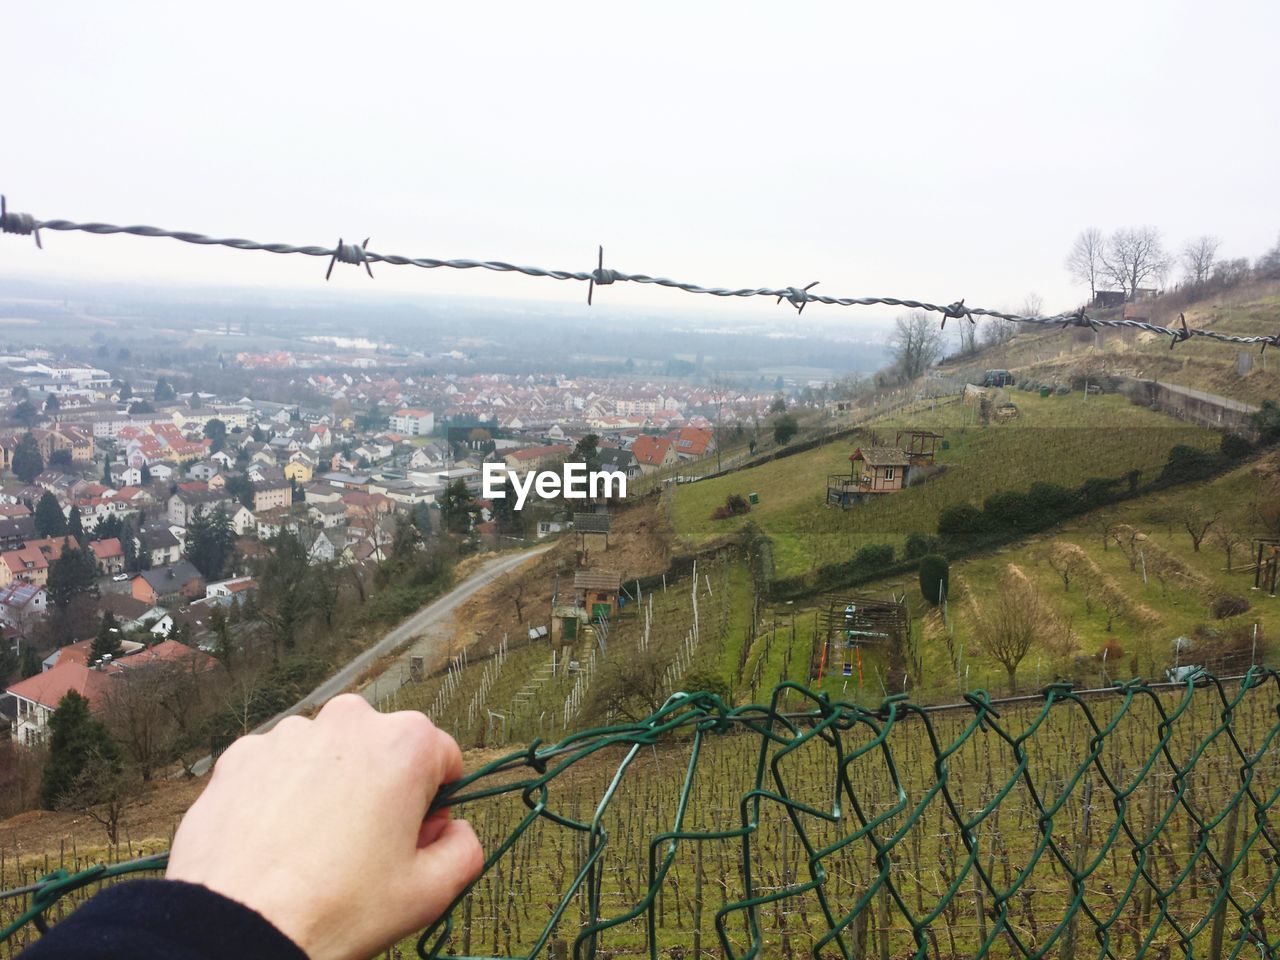 Cropped image of person hand holding chainlink fence in front of green hill